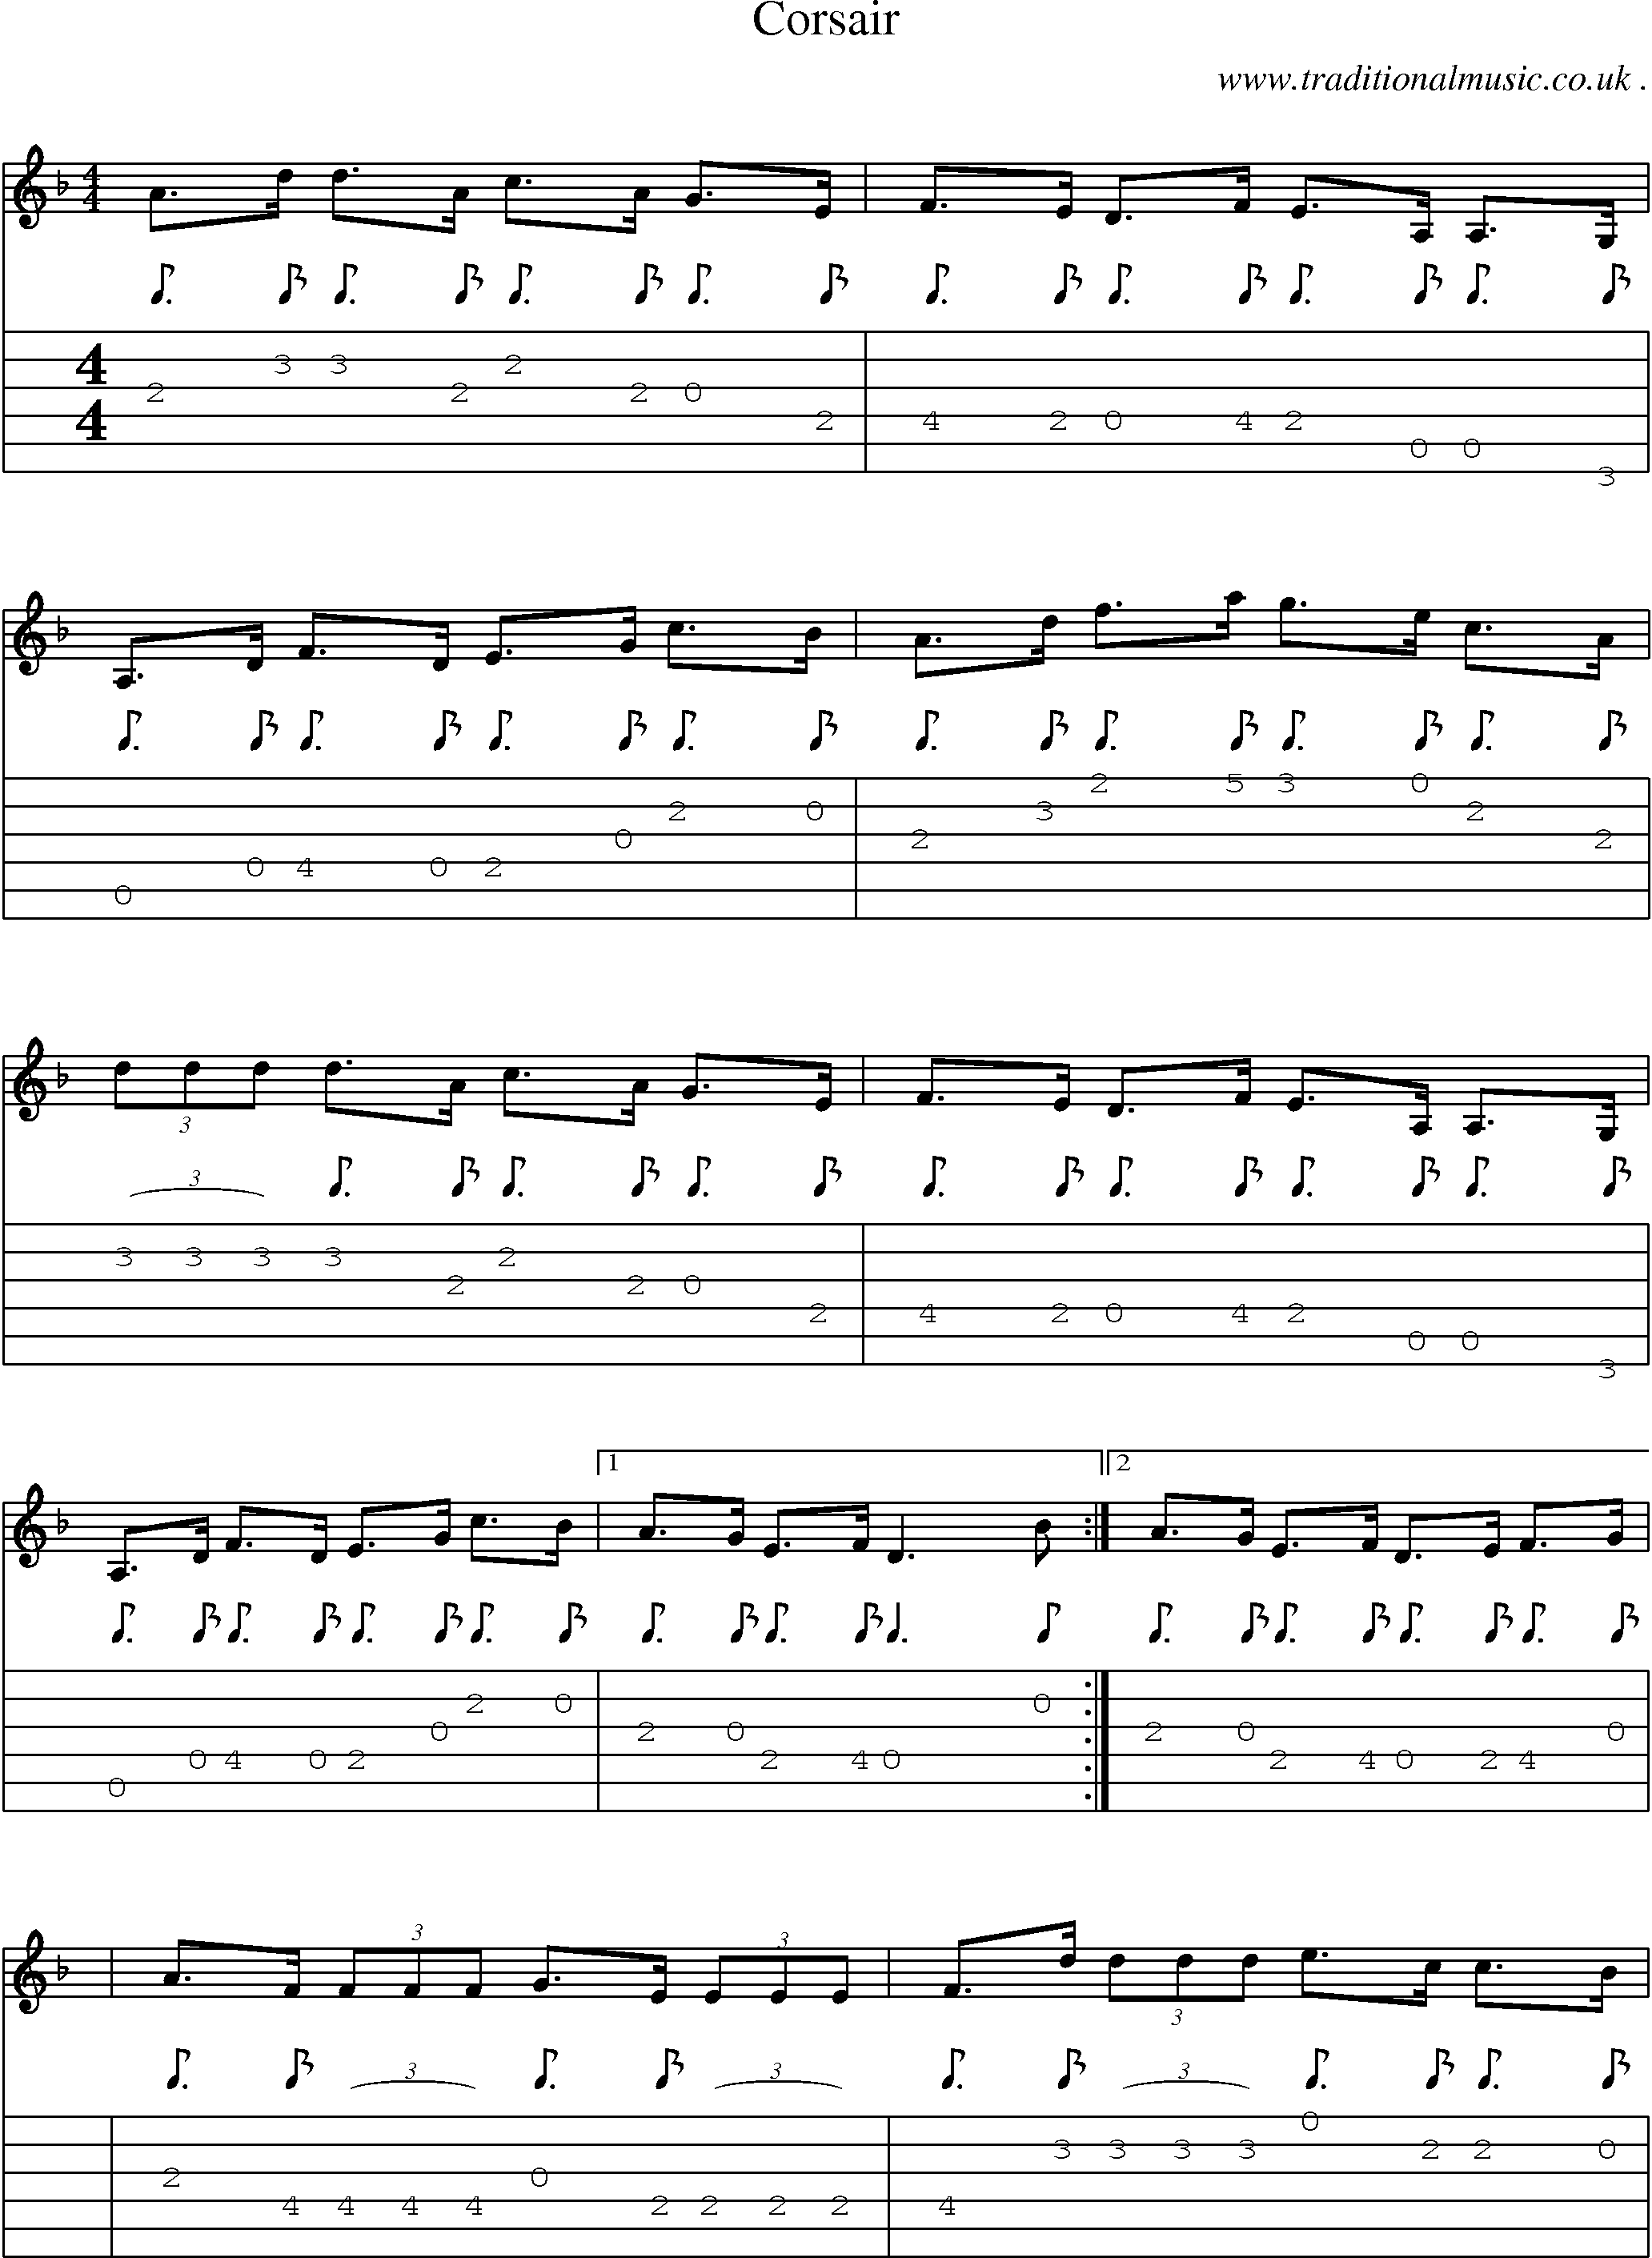 Sheet-Music and Guitar Tabs for Corsair